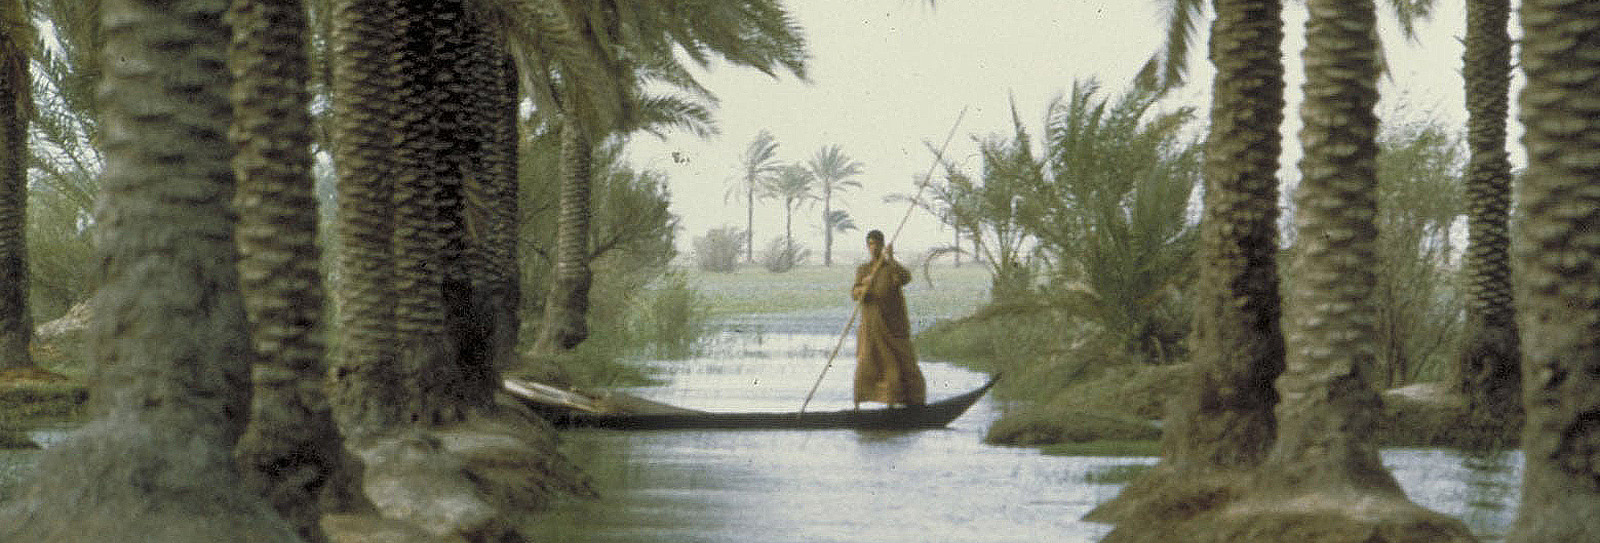 The Marsh Arabs Revisited